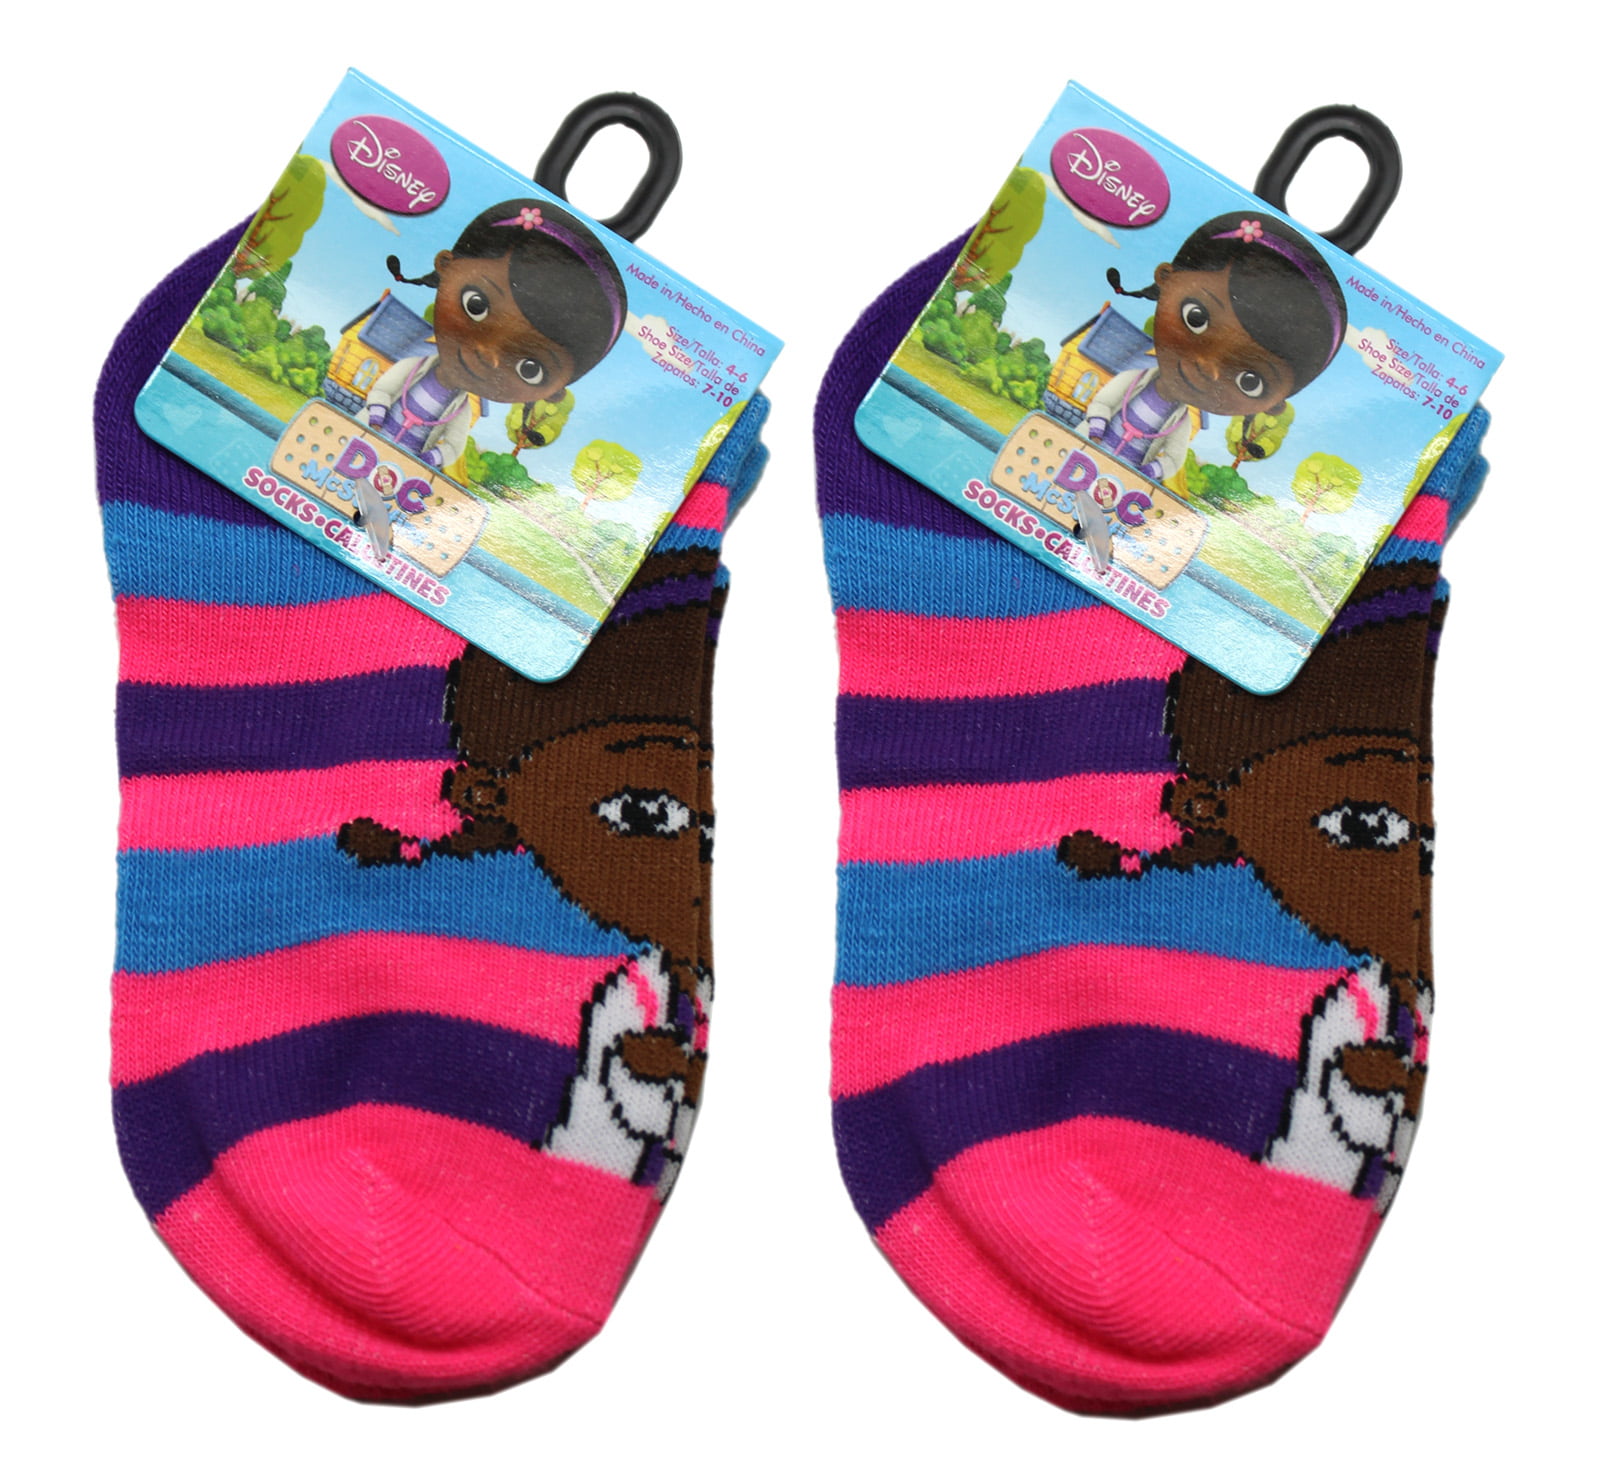 Doc McStuffins 3 pack no-slip safety toe socks size 18-24 mos or 3T-5T new 